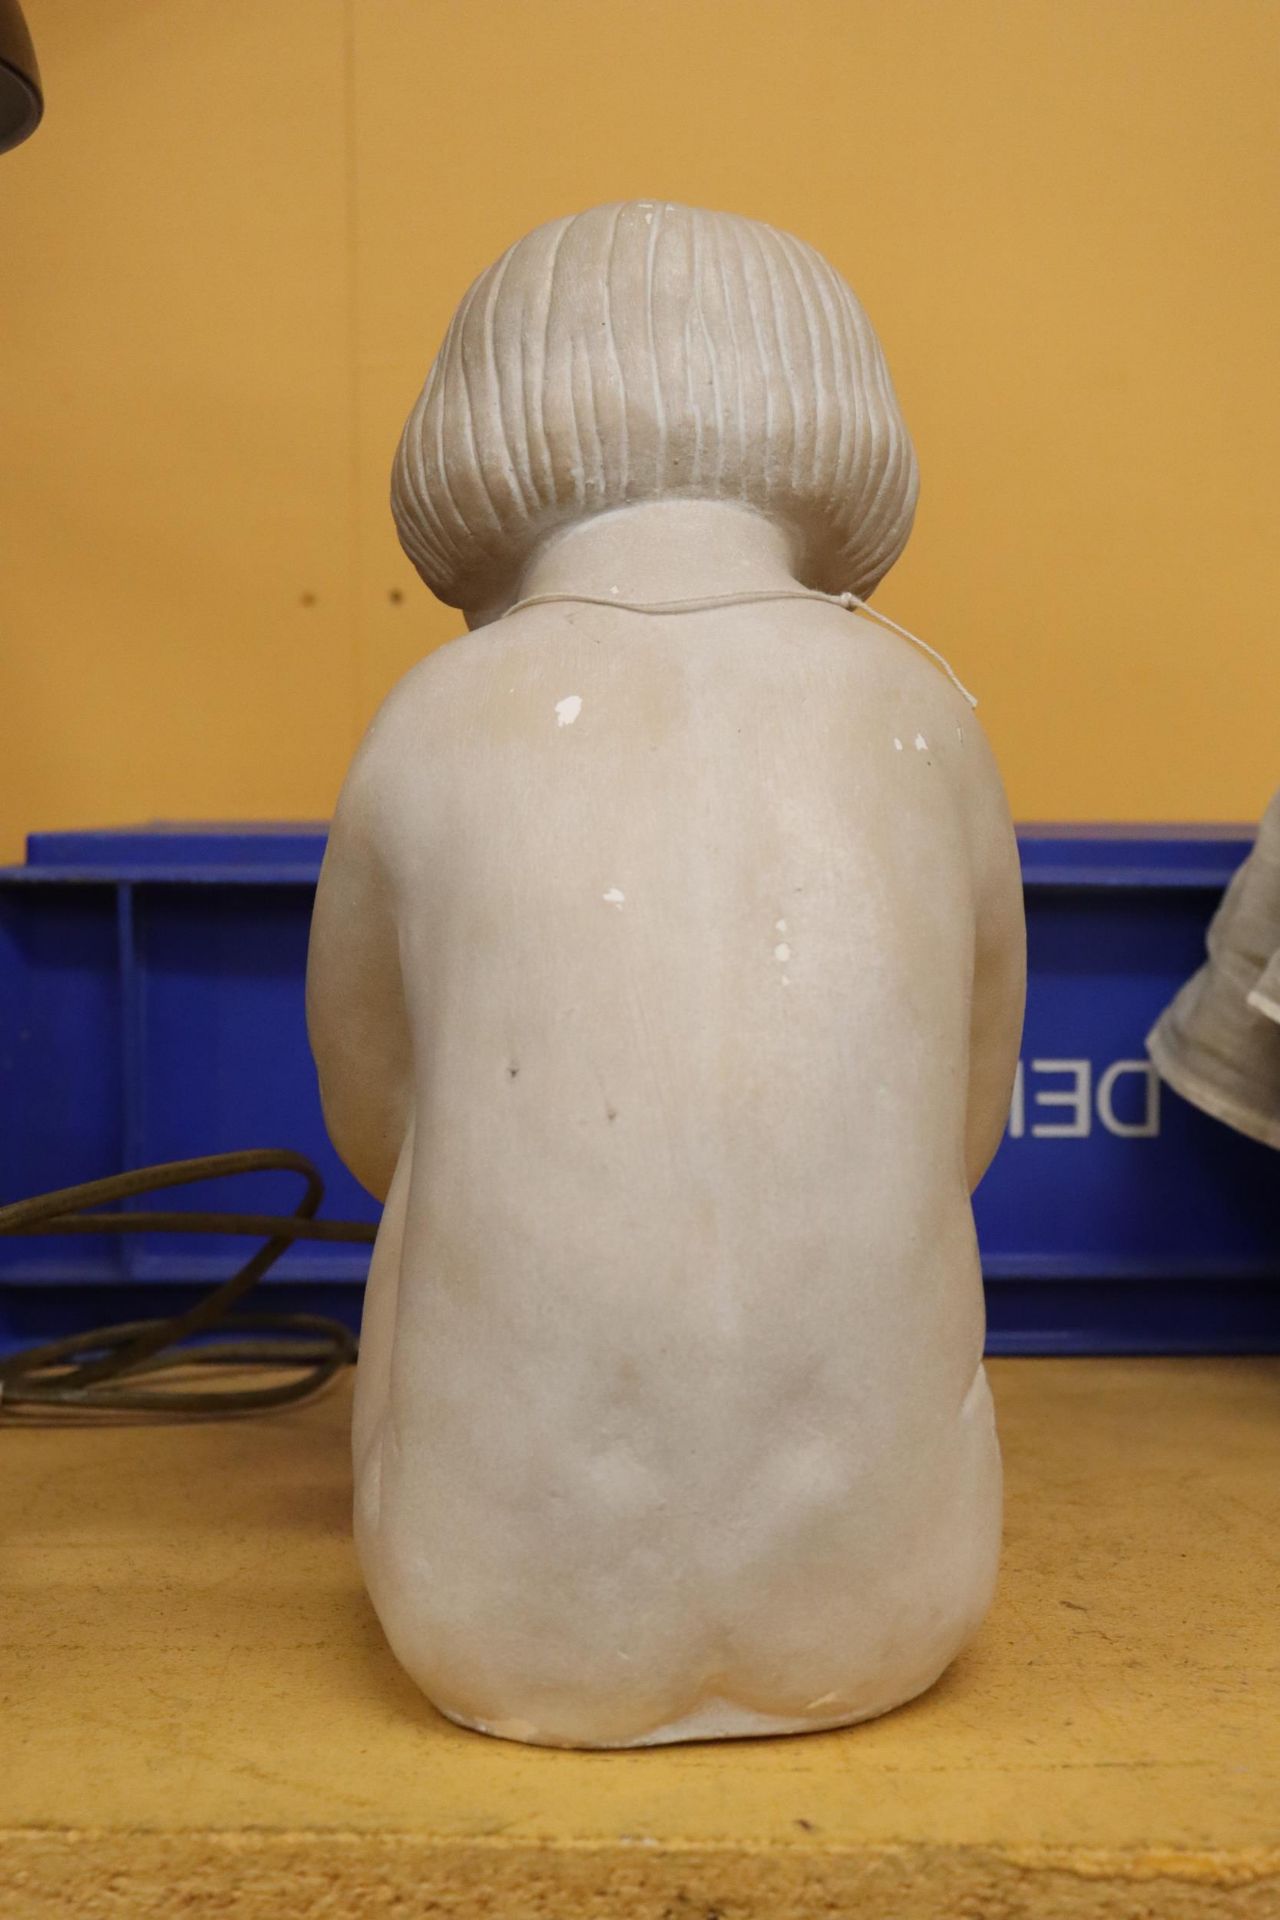 A NOSTALGIA GALLERY CASTING OF A GIRL, HEIGHT 29CM - Image 3 of 5